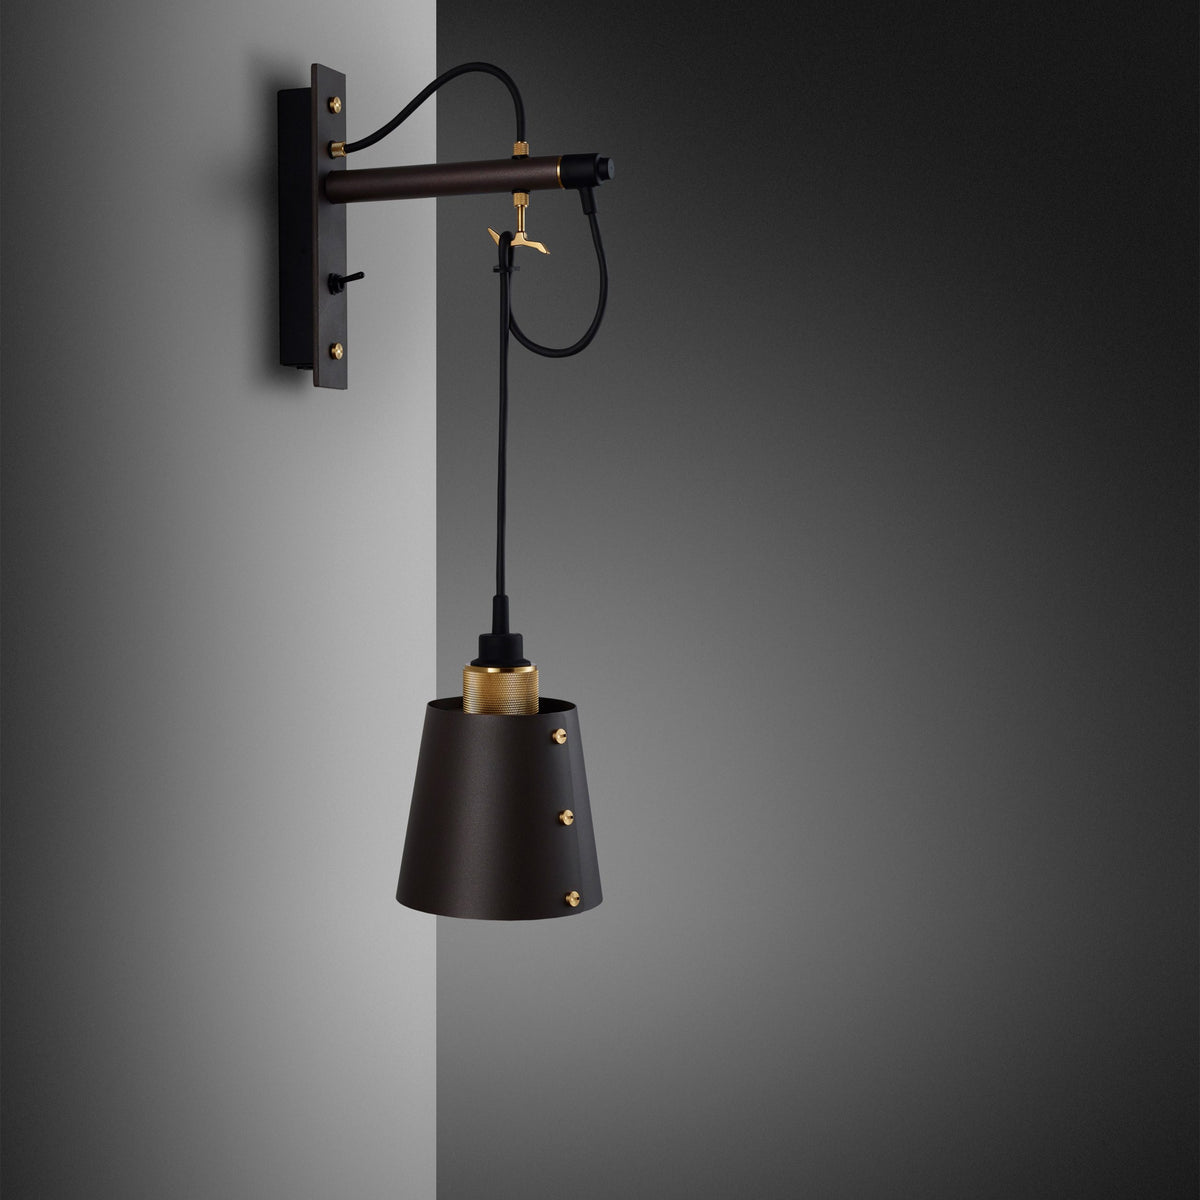 Buster + Punch - NHW-18514 - Hooked Wall Light - Hooked - Graphite / Brass